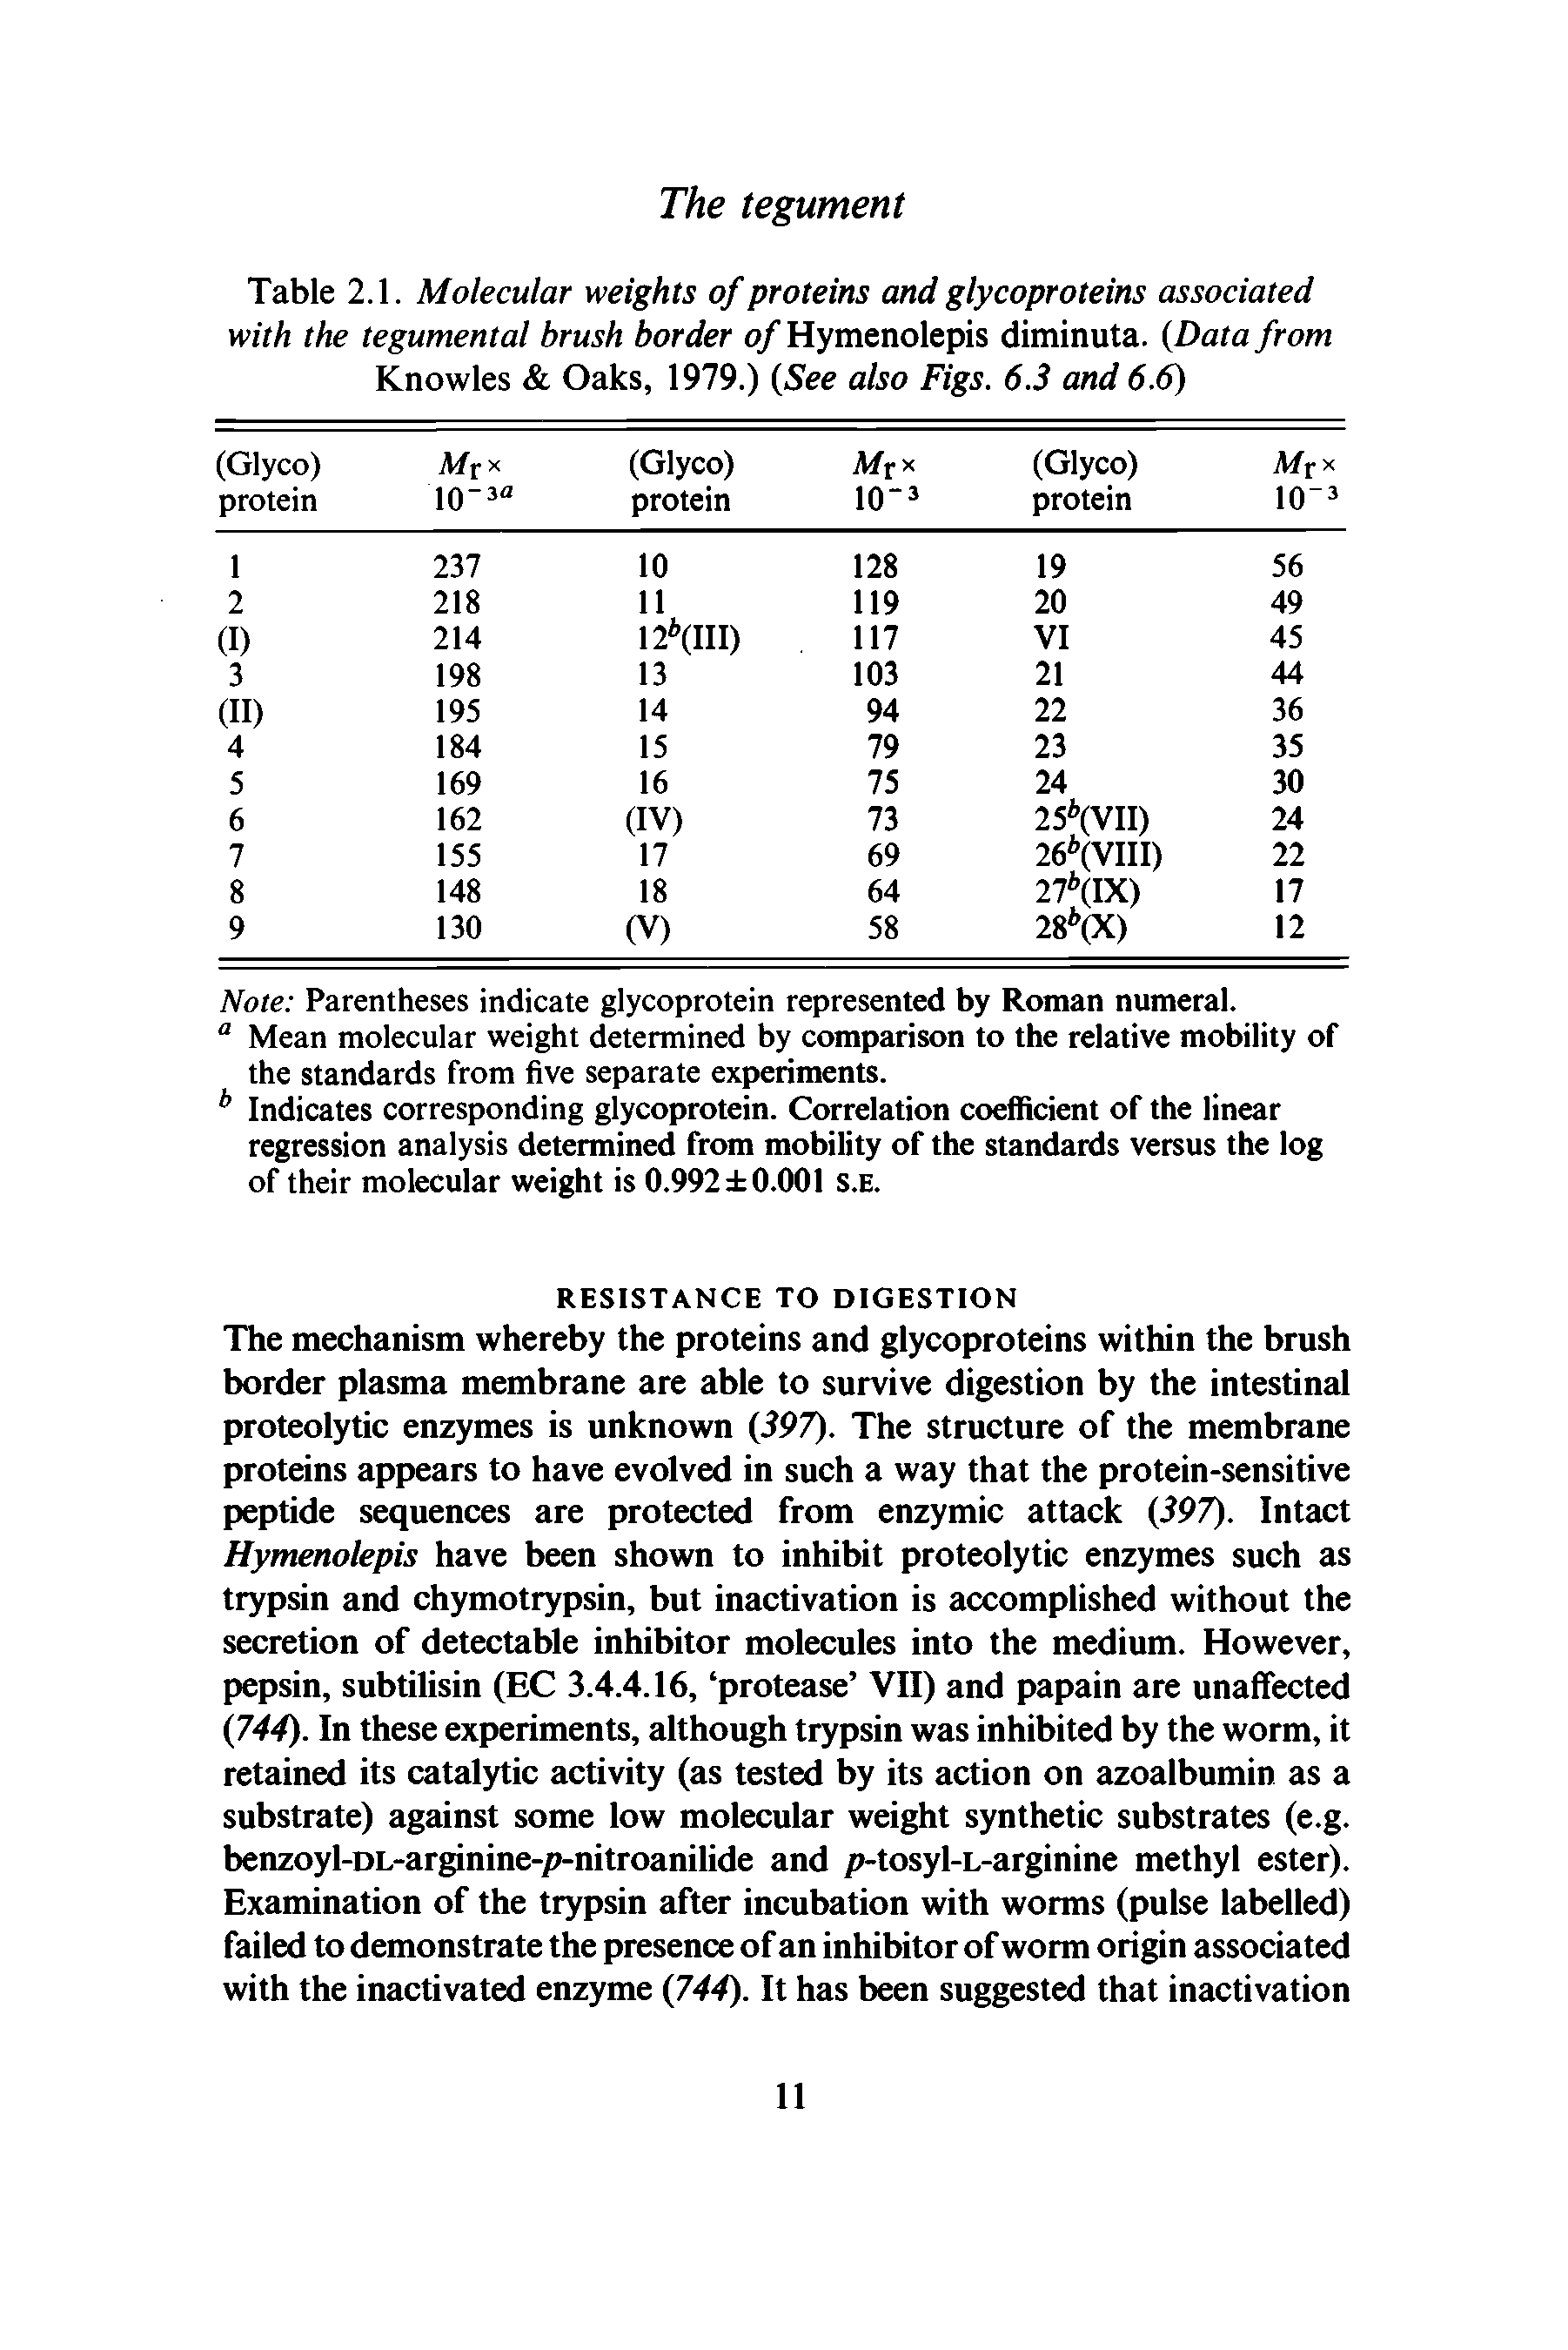 Table 2.1. Molecular weights of proteins and glycoproteins associated with the tegumental brush border of Hymenolepis diminuta. (Data from Knowles Oaks, 1979.) (See also Figs. 6.3 and 6.6)...